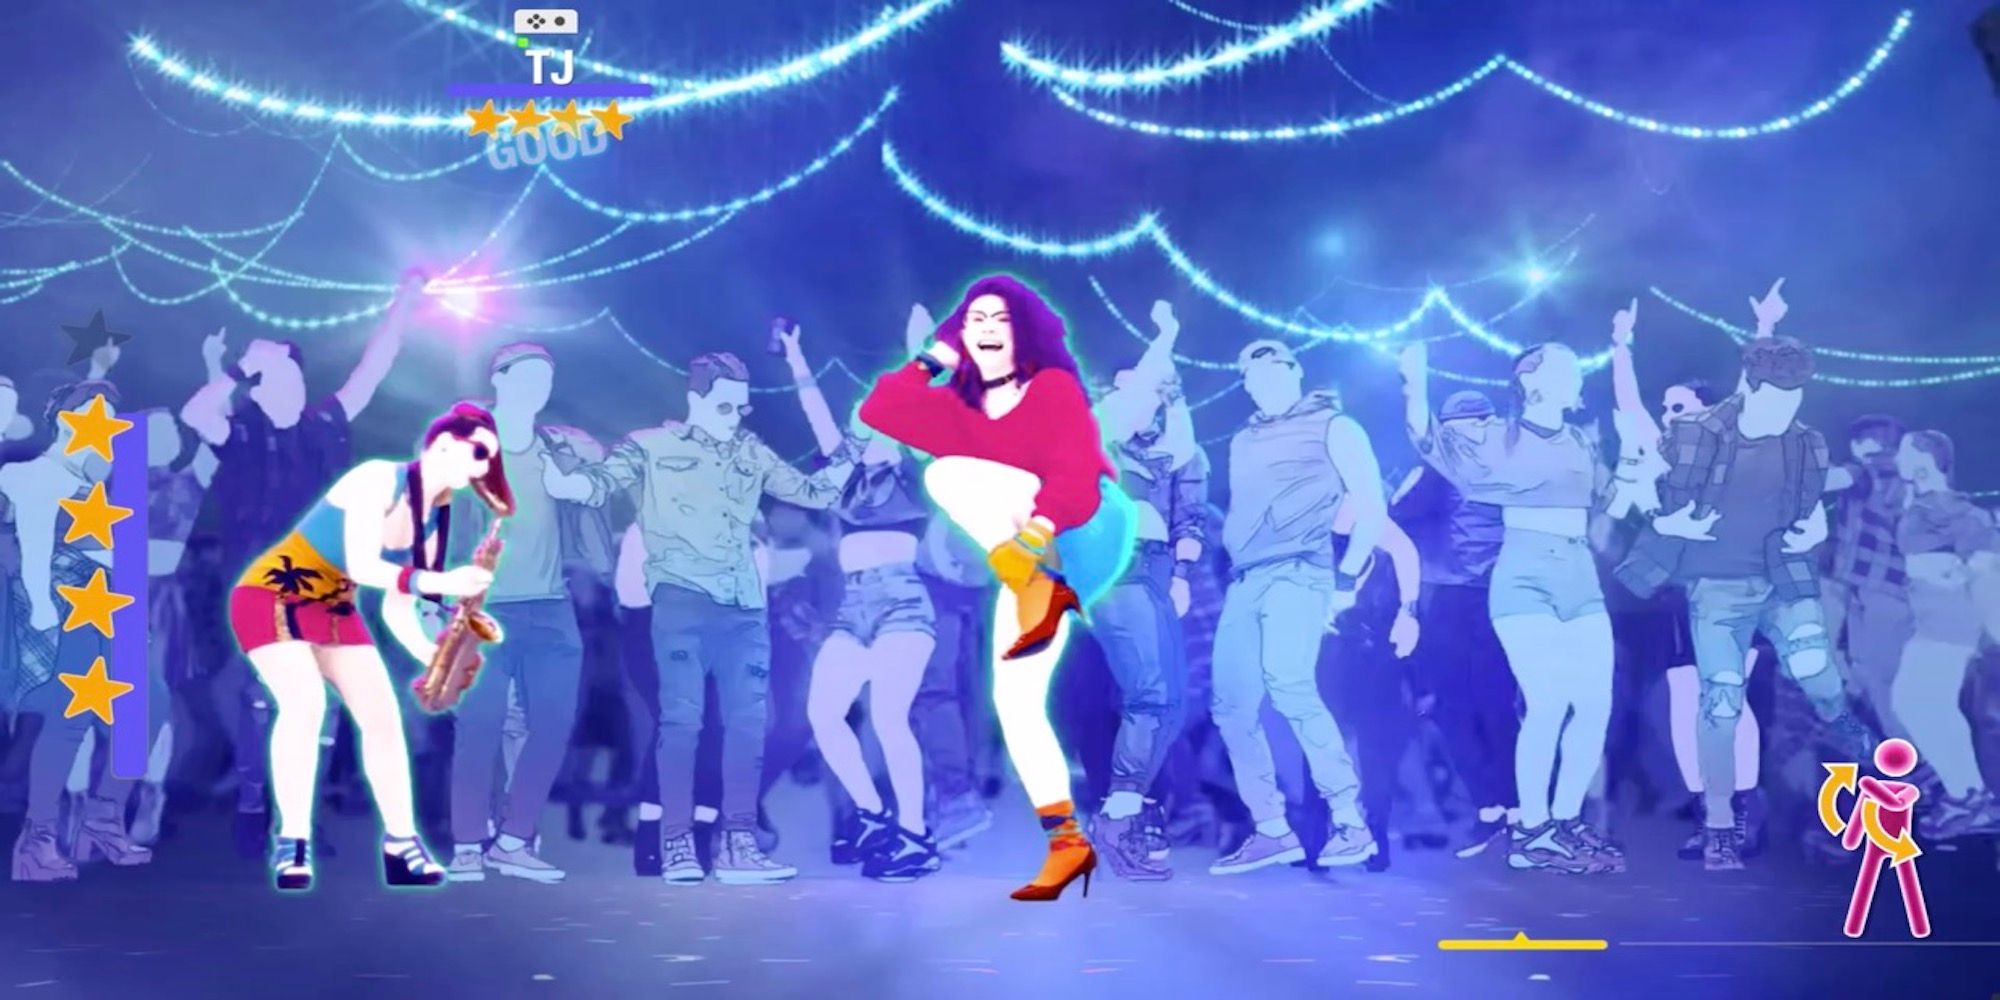 Dancing to Last Friday Night in Just Dance 2022